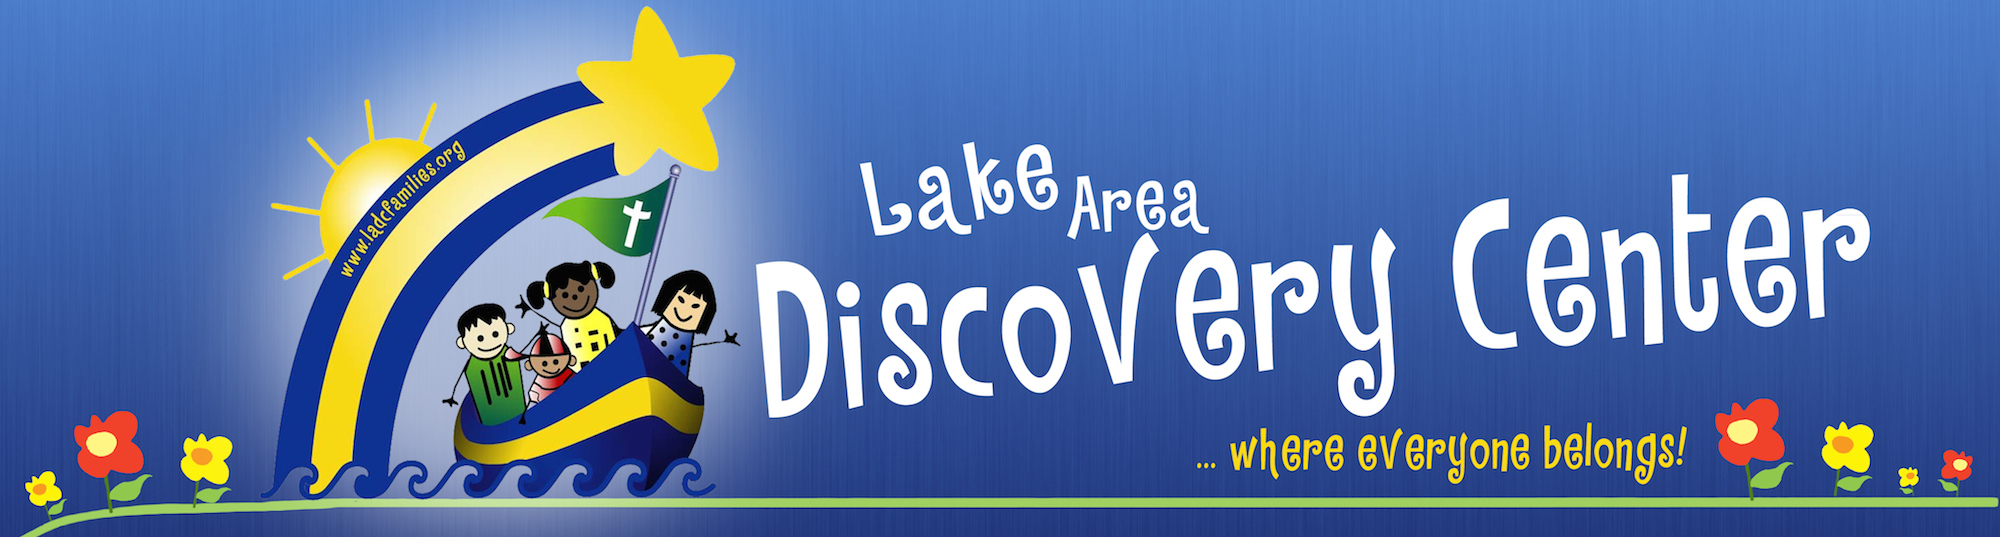 Lake Area Discovery Center at Annunciation School